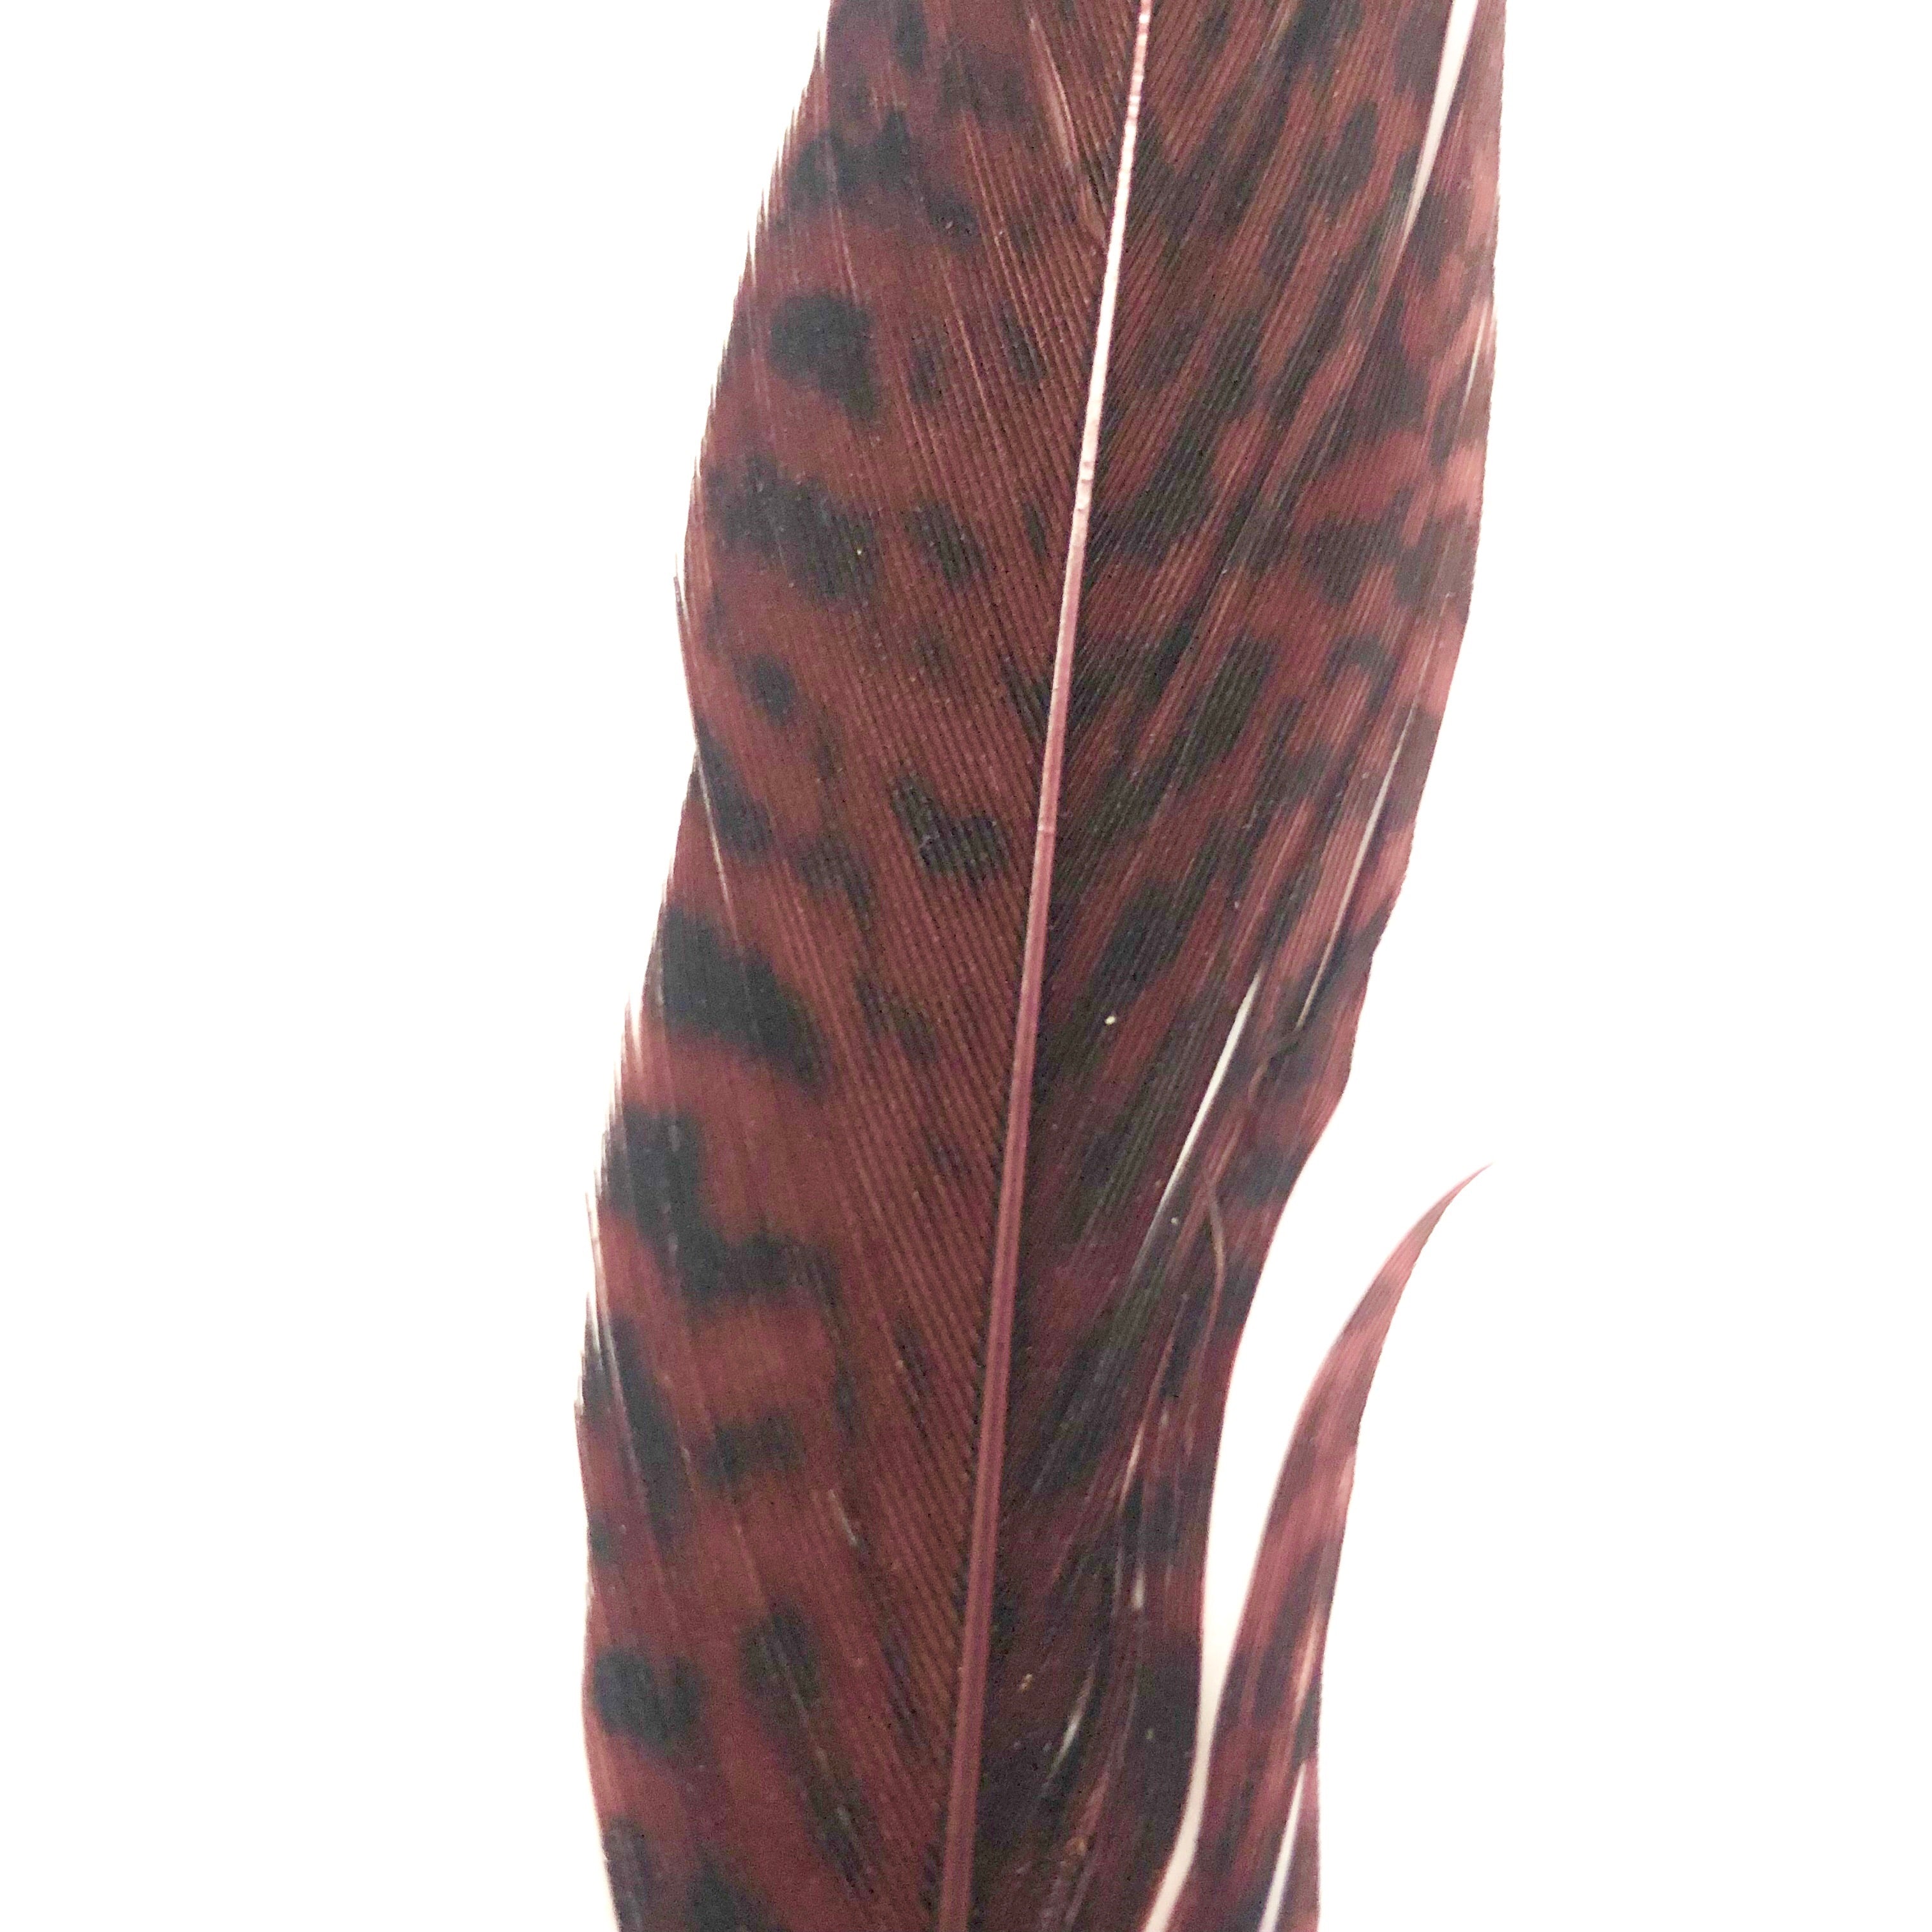 6" to 10" Golden Pheasant Side Tail Feather x 10 pcs - Chocolate Brown